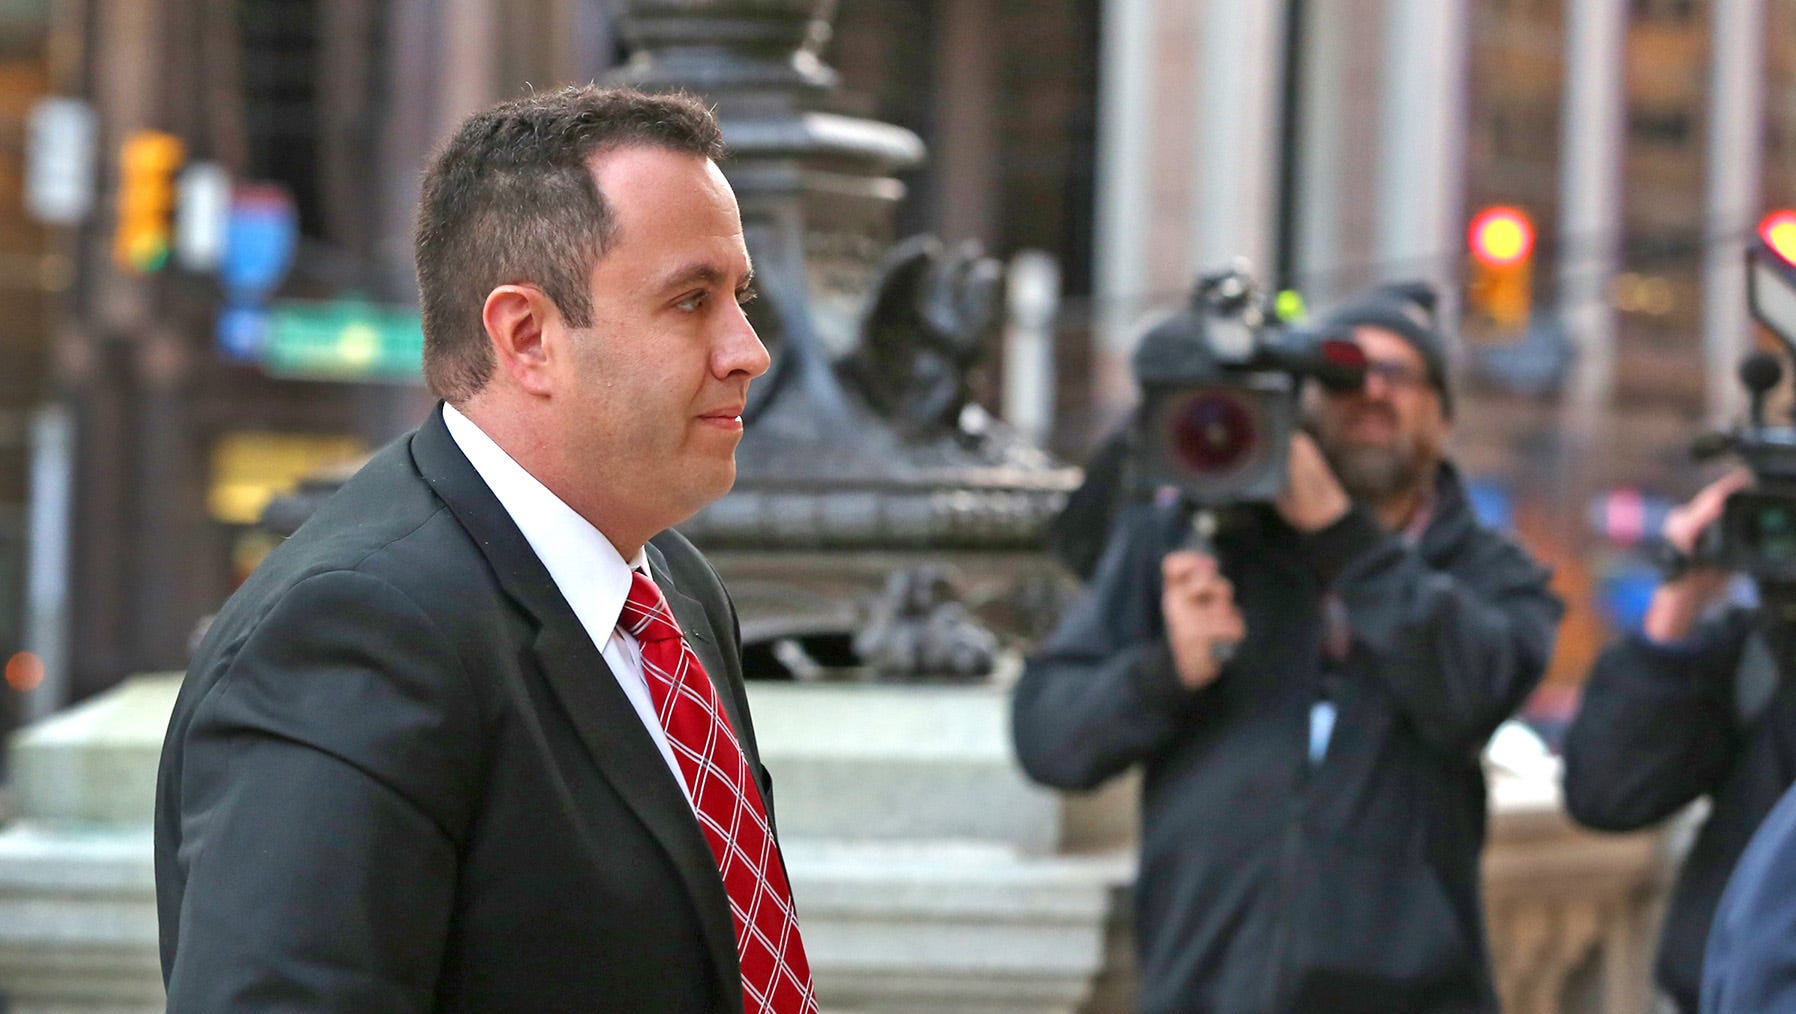 Www Landanpron Com - Jared Fogle sentenced to nearly 16 years on child porn charges